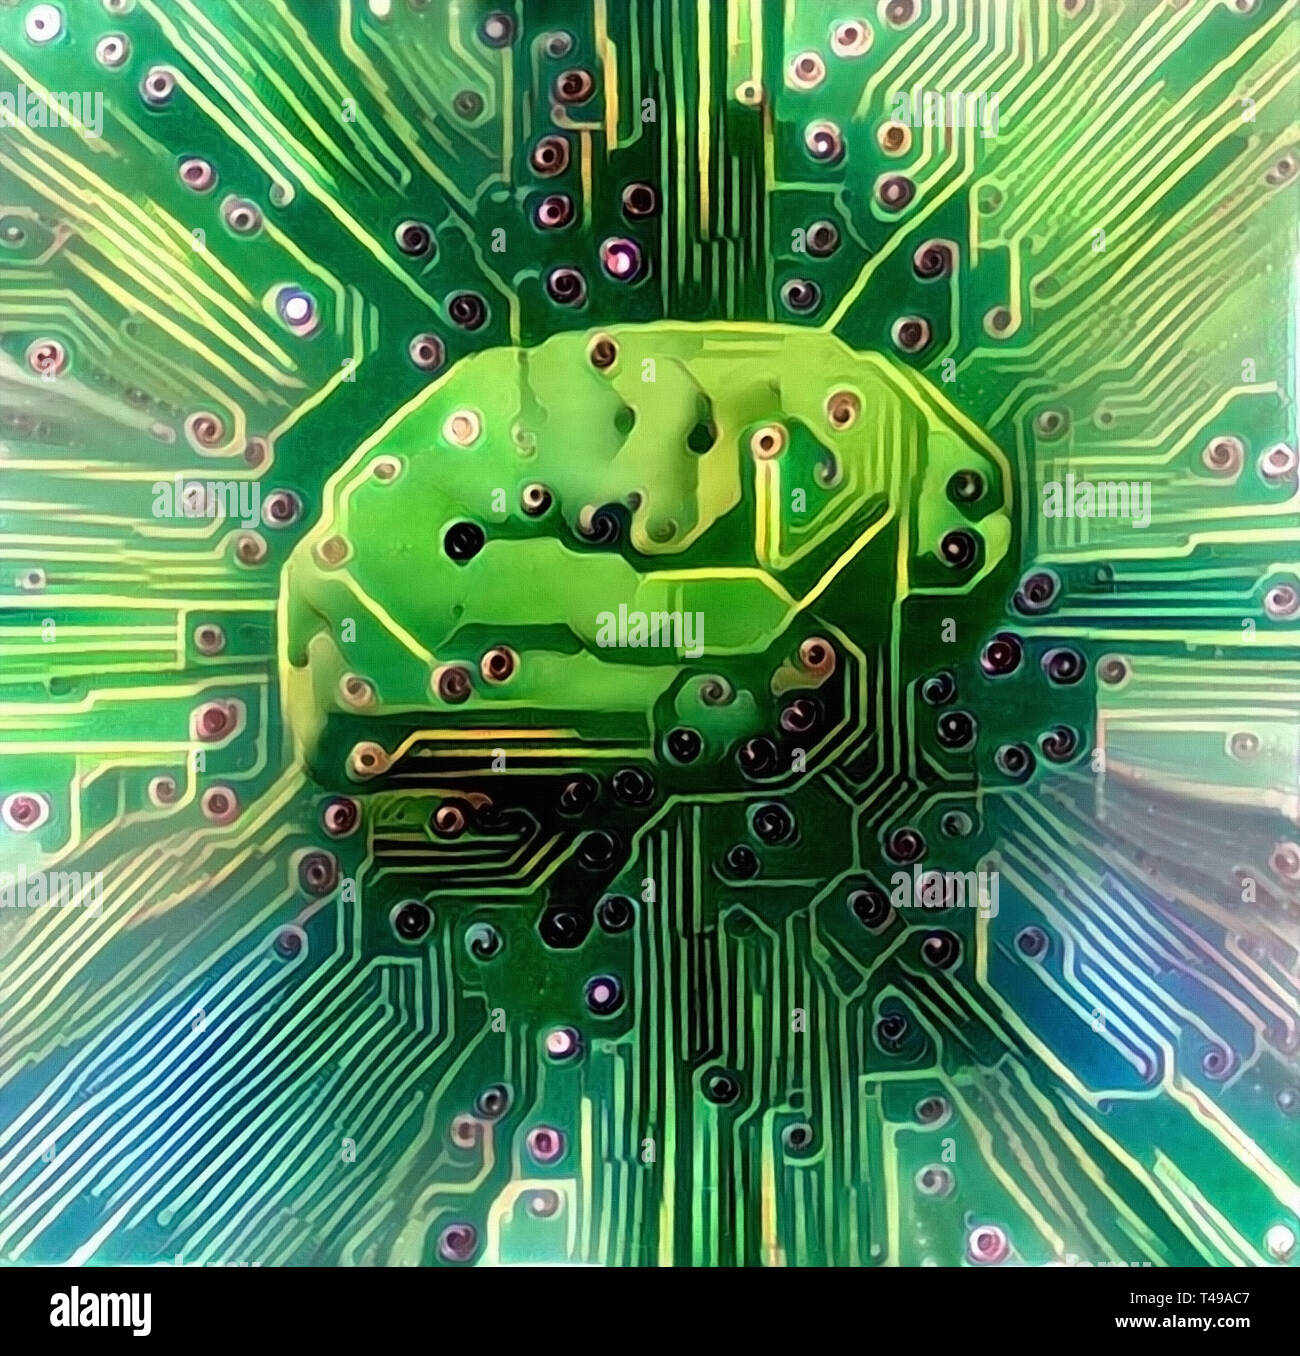 Electronic brain. Sci-Fi painting in green colors Stock Photo